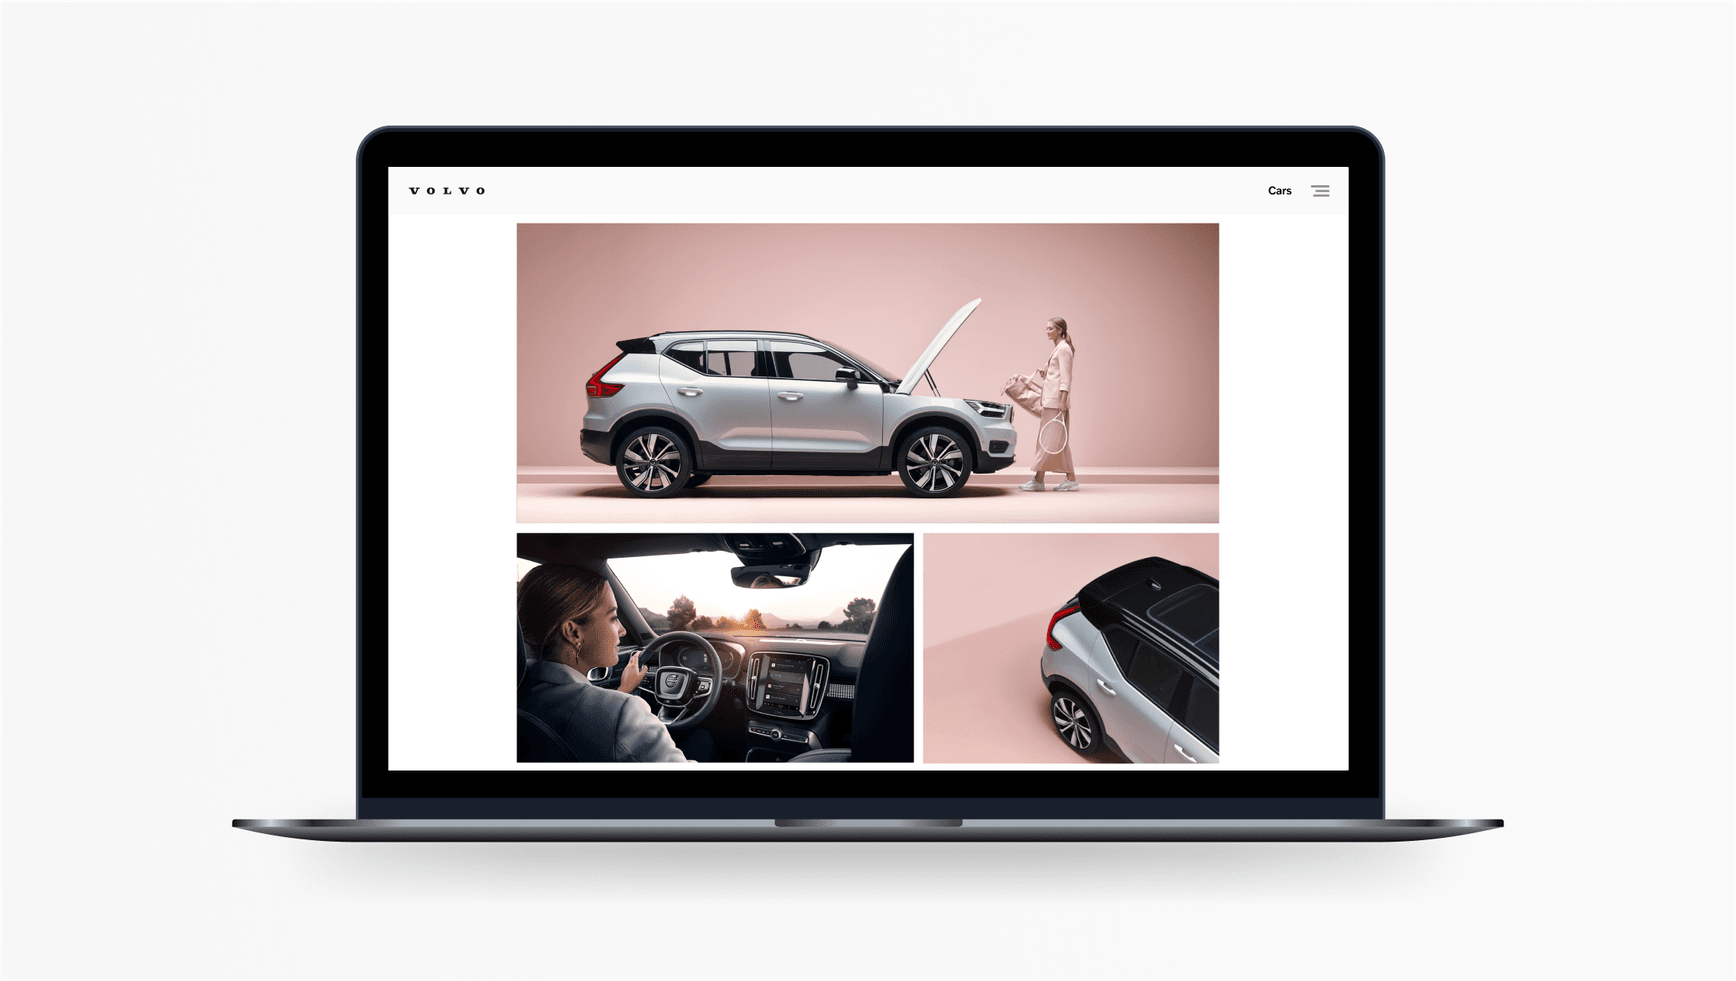 An example of using colour on a website view with an image layout. 3 images are put together using the pink colour theme creating a balanced look and feel, which showcases an XC40 and woman driving and loading the 'frunk'.